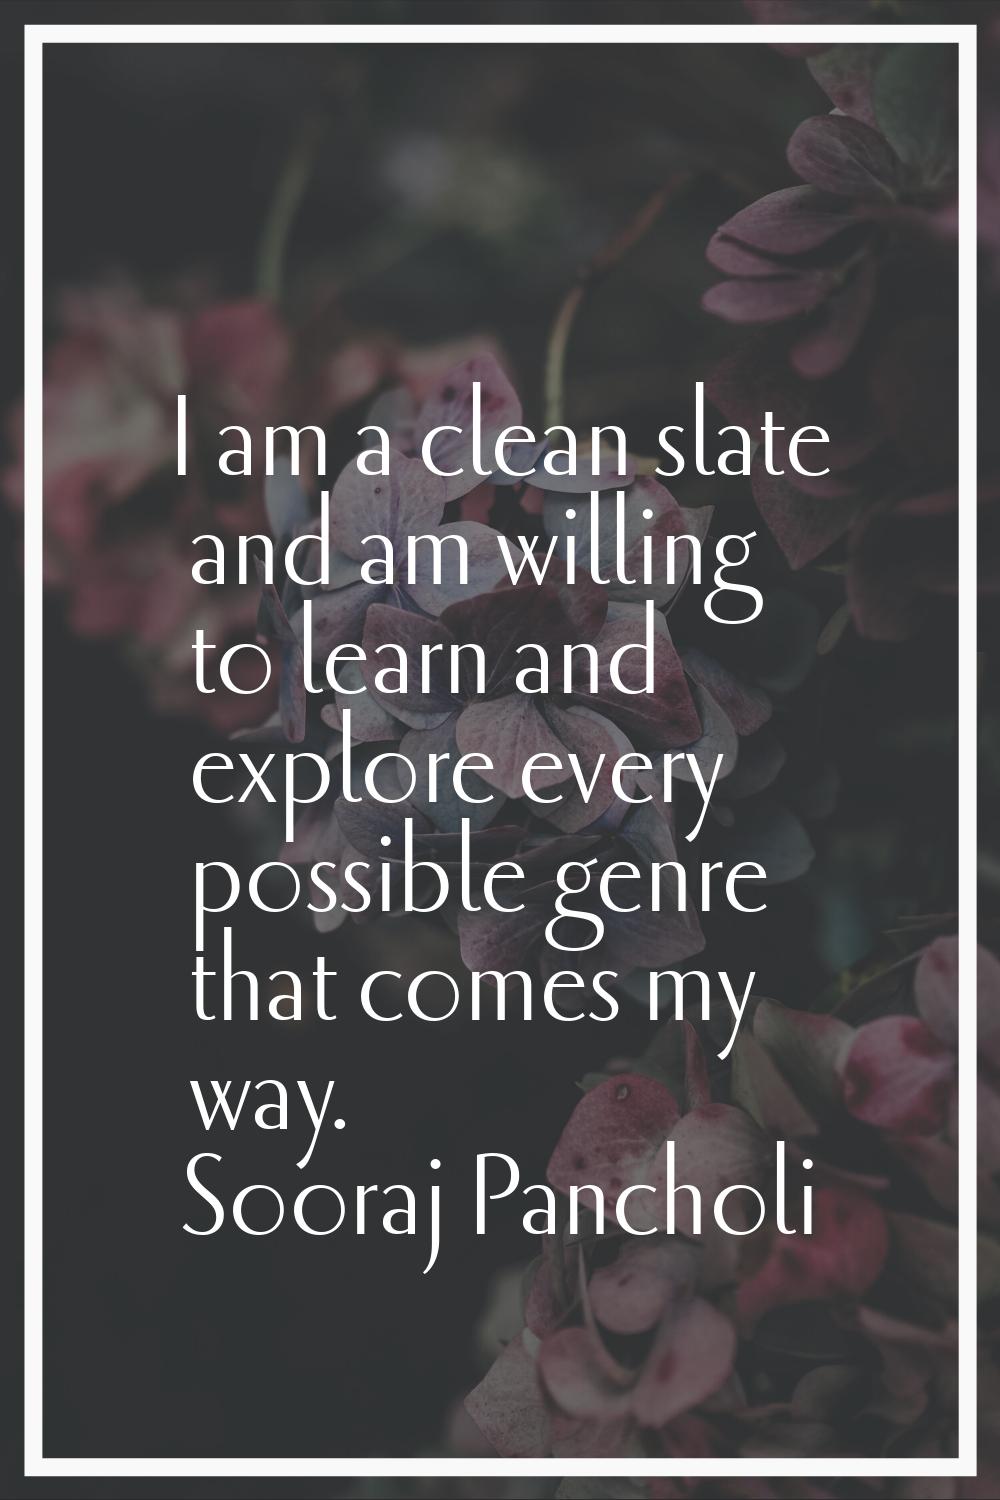 I am a clean slate and am willing to learn and explore every possible genre that comes my way.